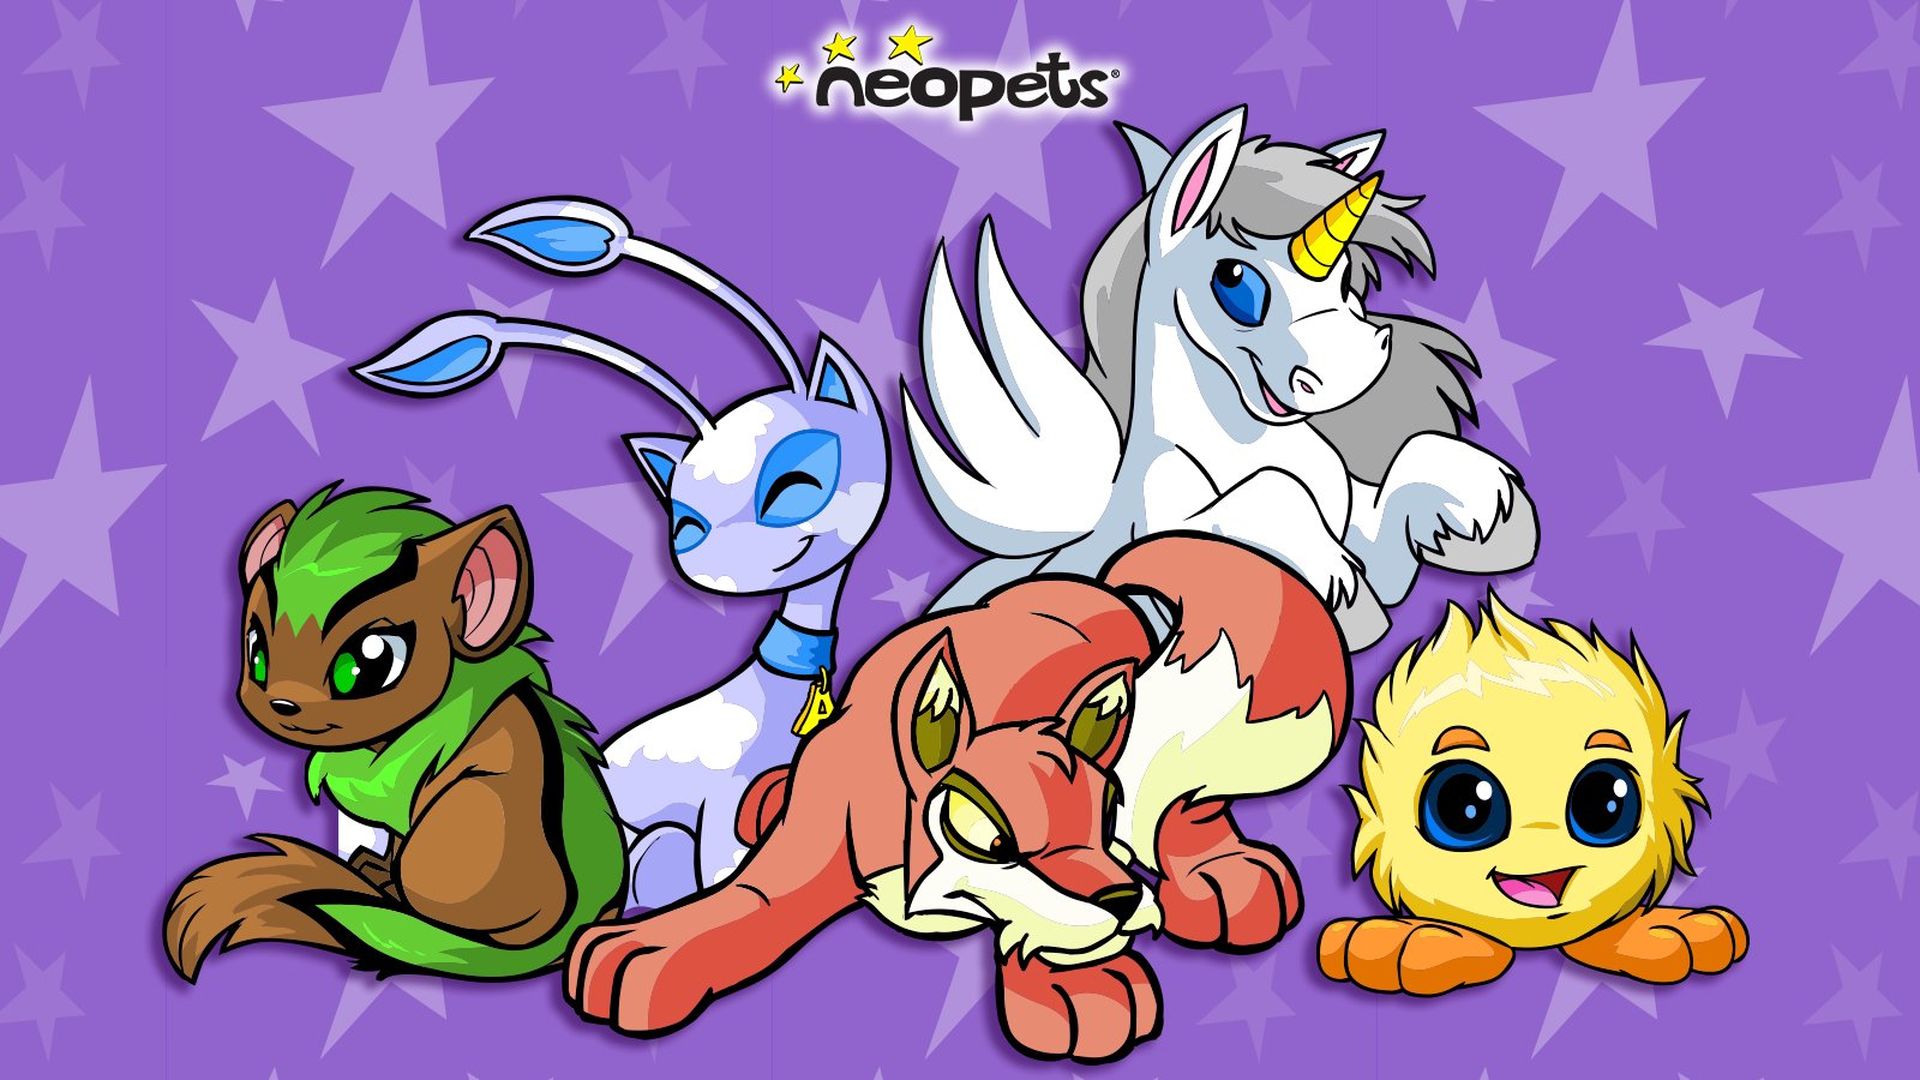 Neopets data breach is officially confirmed